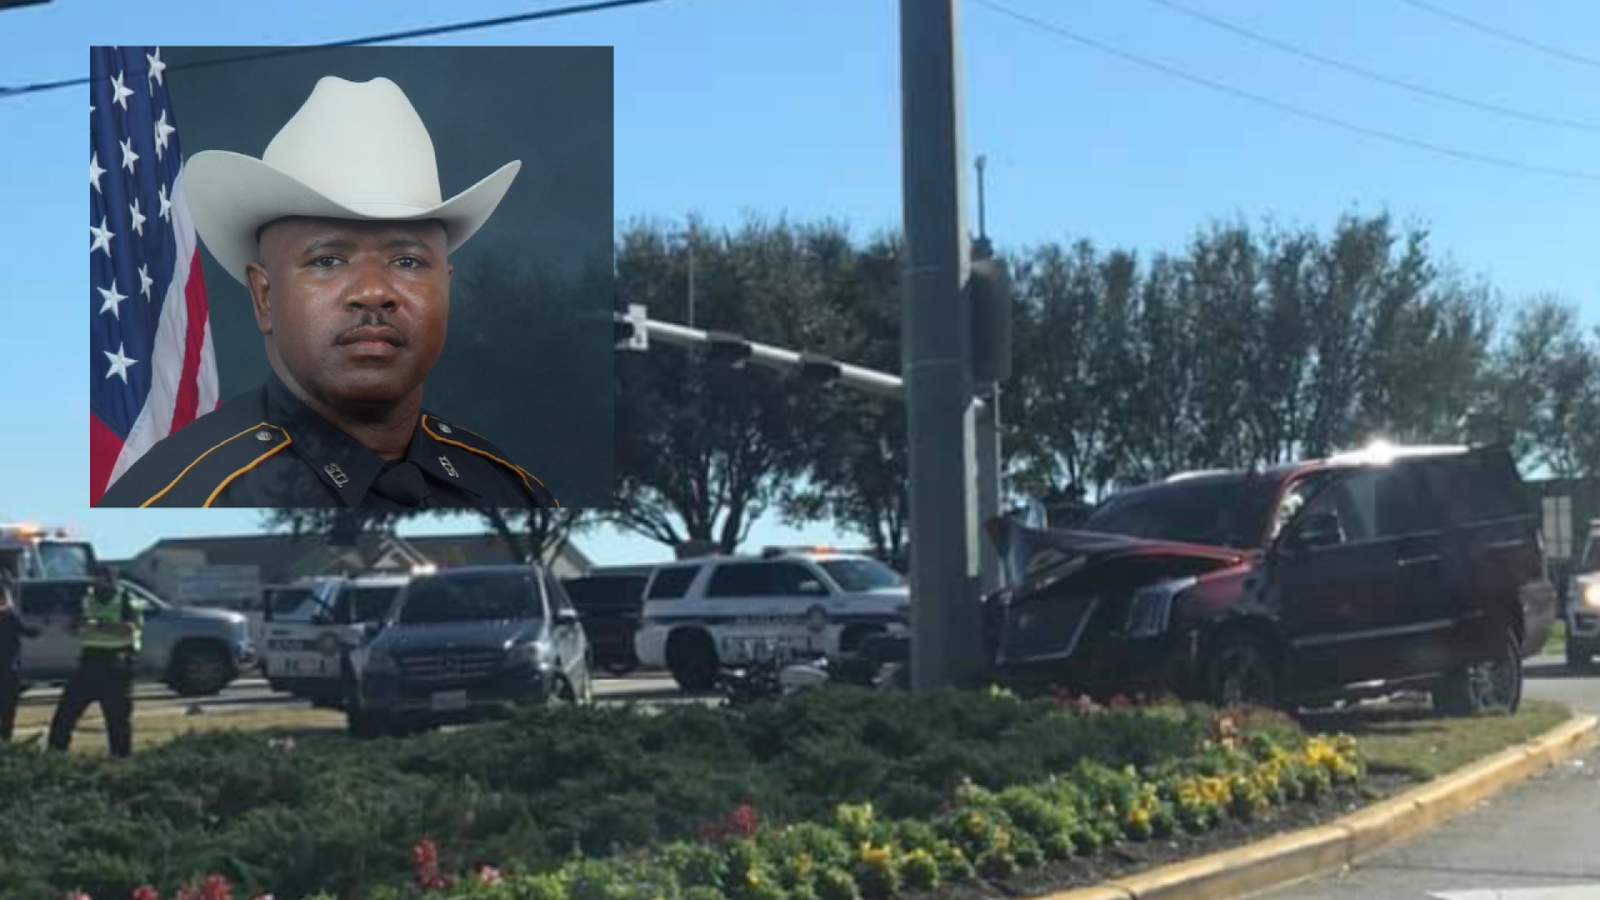 HSCO identifies Sgt. Watson as an off-duty police officer killed in a motorcycle accident in Pearland